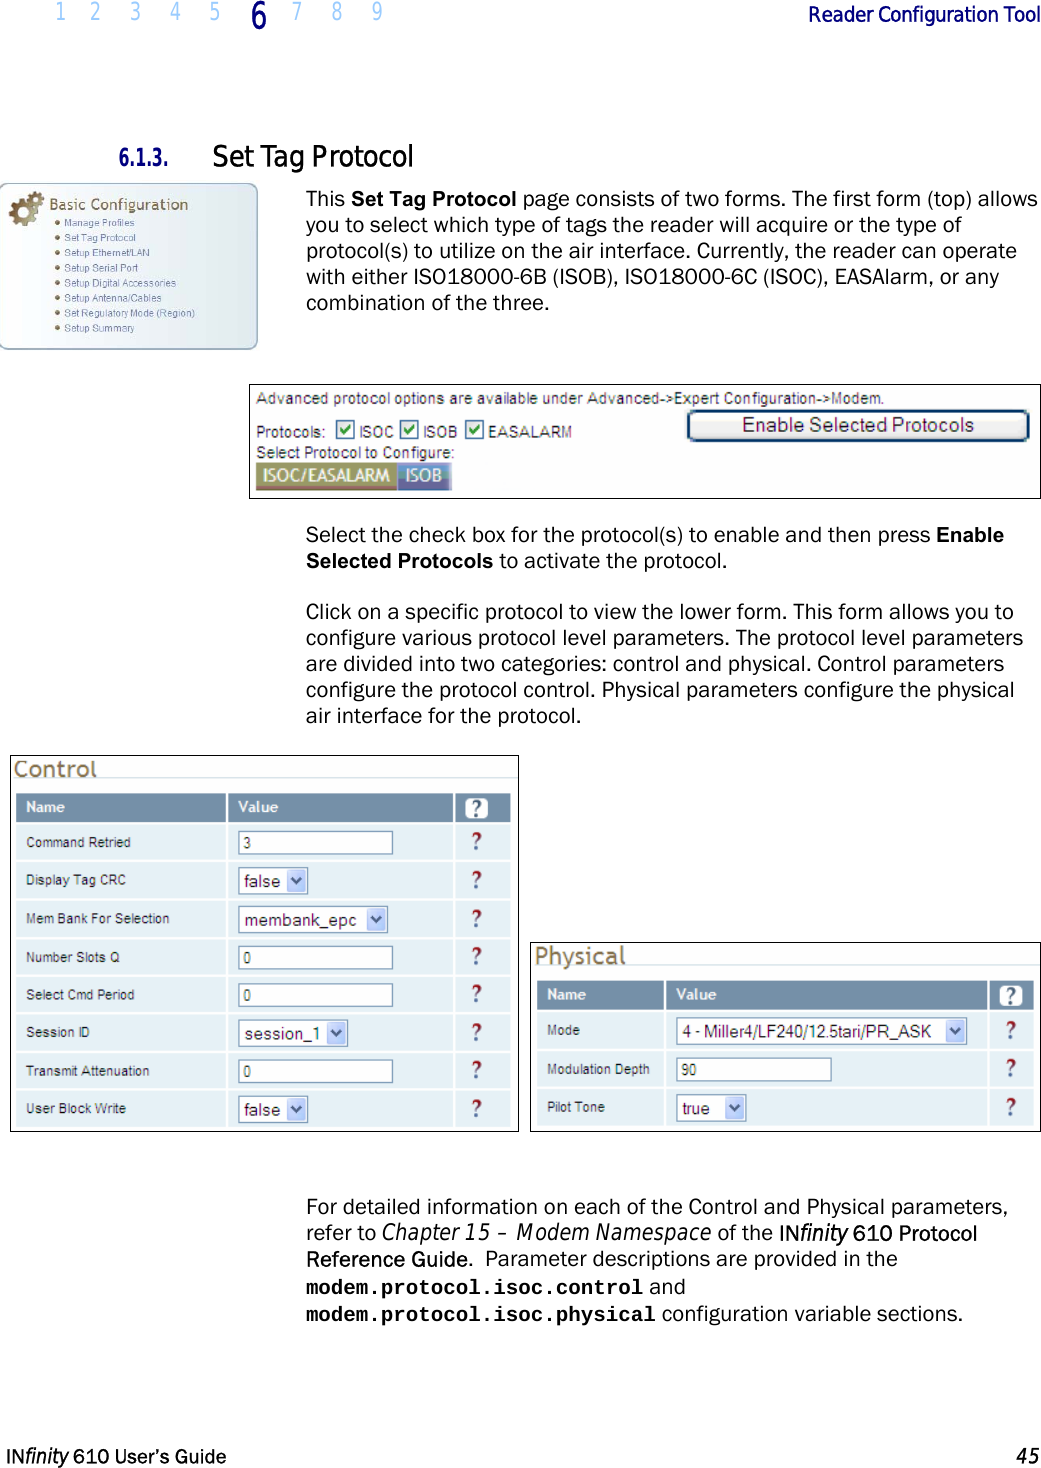  1 2 3 4 5 6  7 8 9        Reader Configuration Tool   INfinity 610 User’s Guide  45  6.1.3. Set Tag Protocol This Set Tag Protocol page consists of two forms. The first form (top) allows you to select which type of tags the reader will acquire or the type of protocol(s) to utilize on the air interface. Currently, the reader can operate with either ISO18000-6B (ISOB), ISO18000-6C (ISOC), EASAlarm, or any combination of the three.   Select the check box for the protocol(s) to enable and then press Enable Selected Protocols to activate the protocol. Click on a specific protocol to view the lower form. This form allows you to configure various protocol level parameters. The protocol level parameters are divided into two categories: control and physical. Control parameters configure the protocol control. Physical parameters configure the physical air interface for the protocol.      For detailed information on each of the Control and Physical parameters, refer to Chapter 15 – Modem Namespace of the INfinity 610 Protocol Reference Guide.  Parameter descriptions are provided in the modem.protocol.isoc.control and modem.protocol.isoc.physical configuration variable sections. 